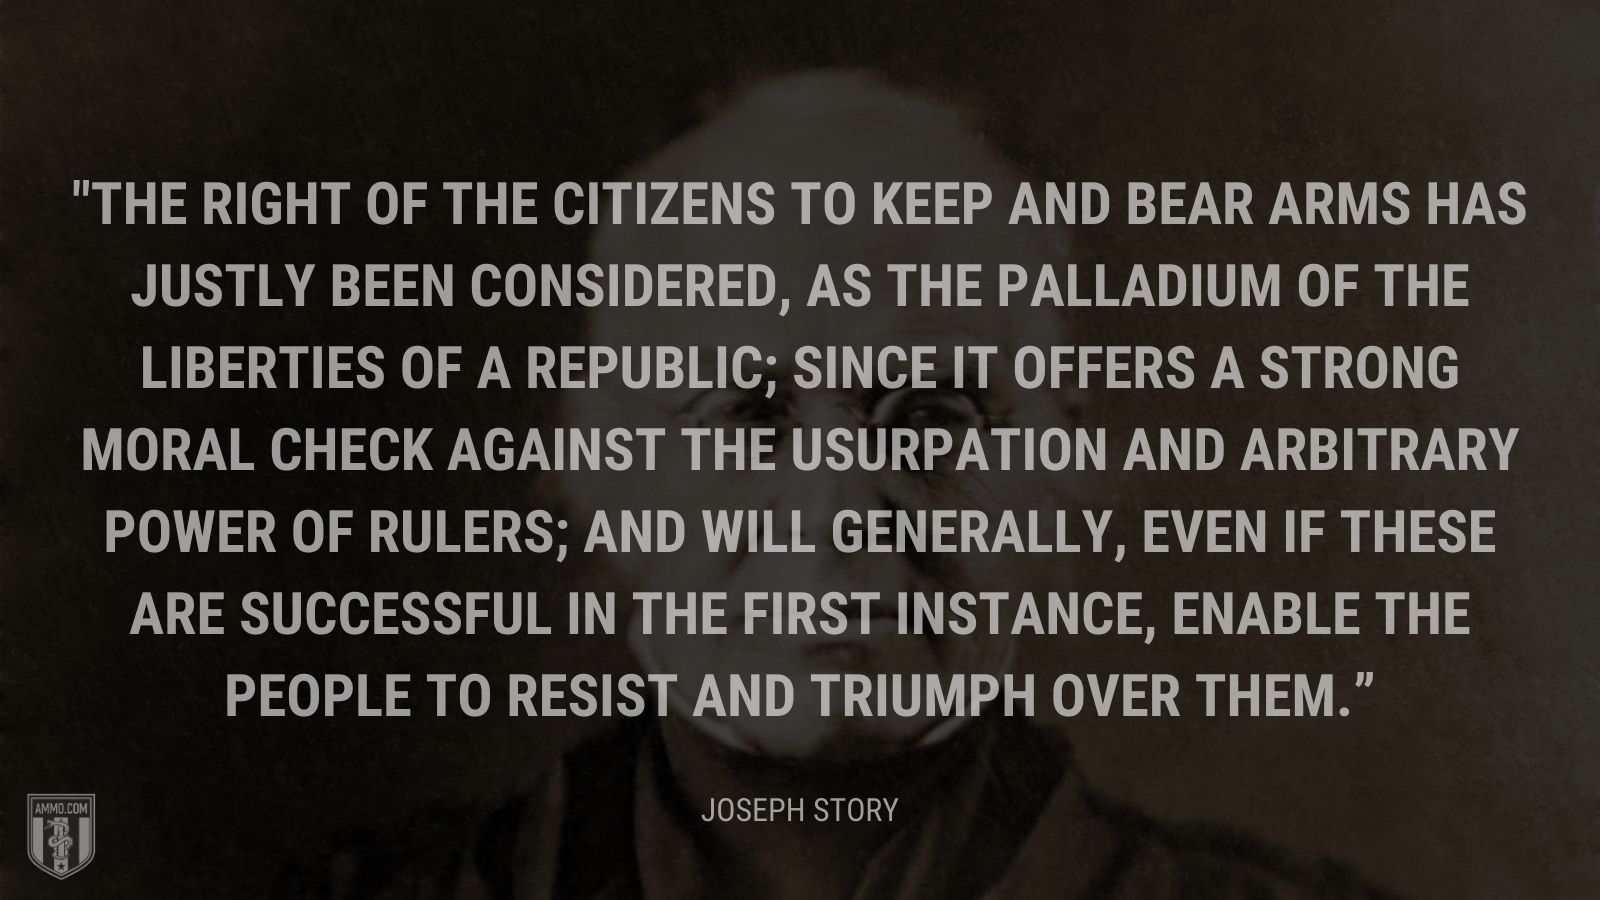 “The right of the citizens to keep and bear arms has justly been considered, as the palladium of the liberties of a republic; since it offers a strong moral check against the usurpation and arbitrary power of rulers; and will generally, even if these are successful in the first instance, enable the people to resist and triumph over them.” - Joseph Story